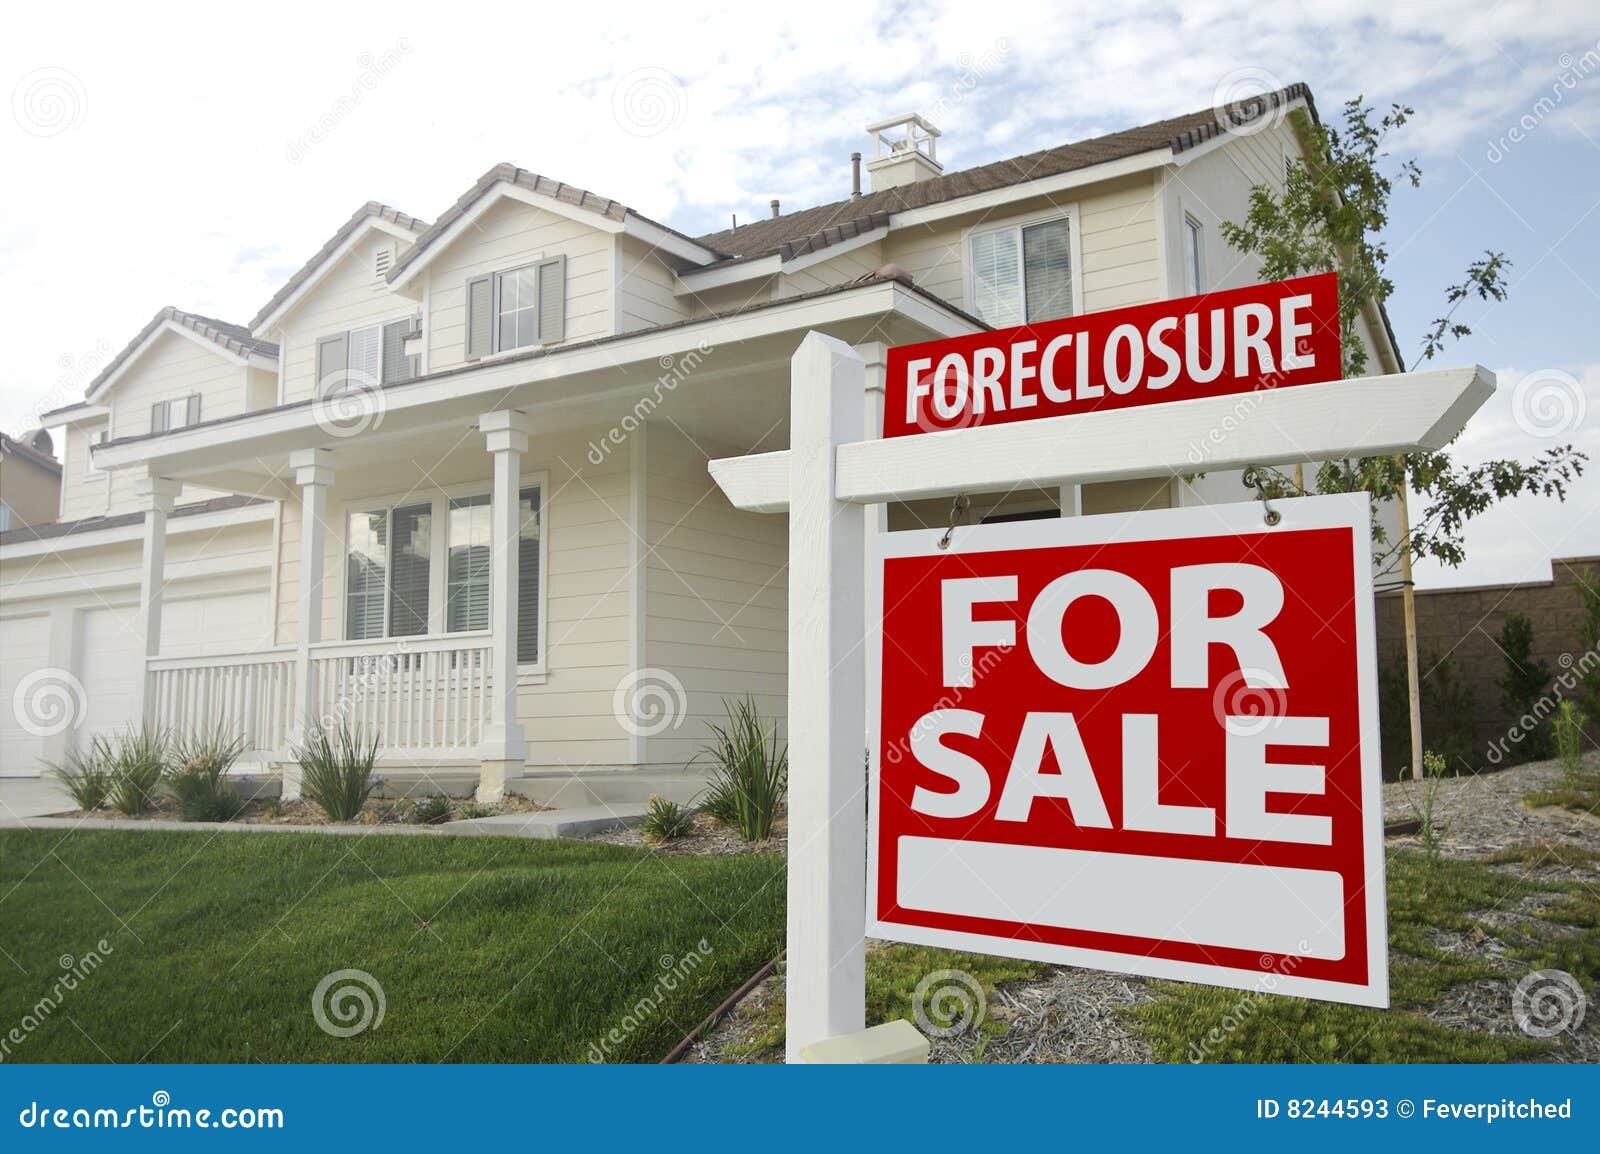 foreclosure home for sale sign and house